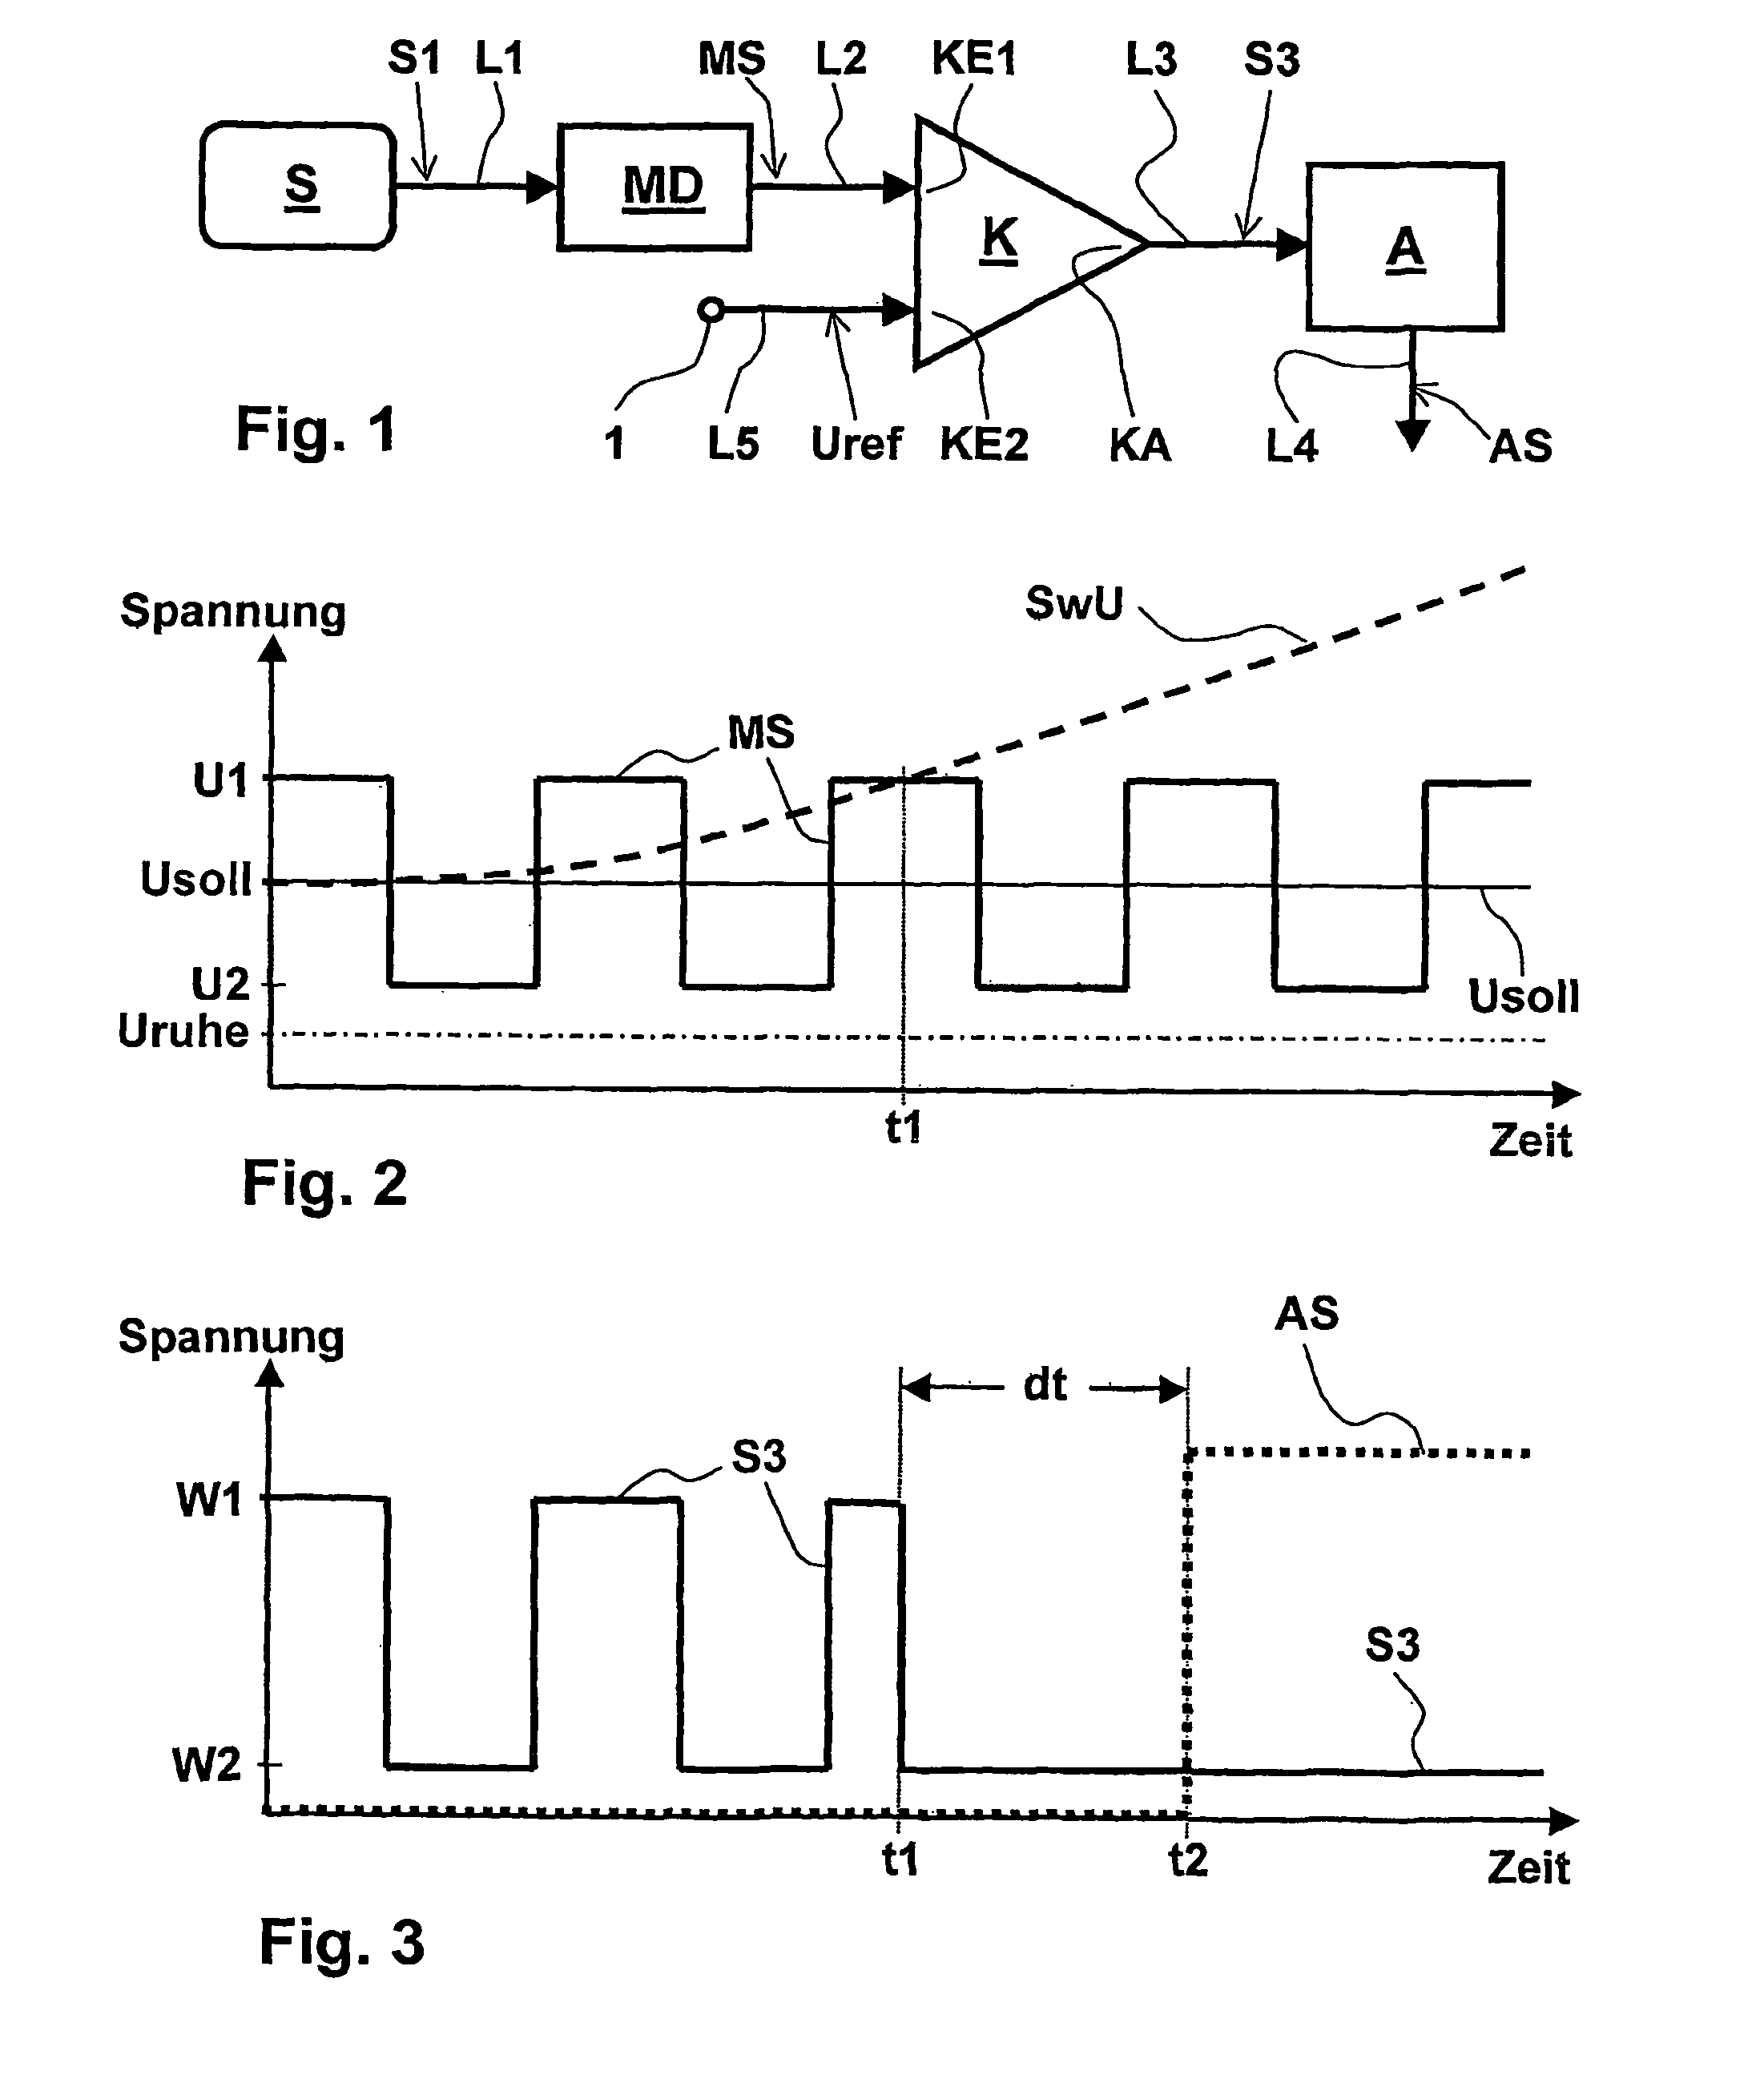 Method for monitoring whether the switching threshold of a switching transducer lies within a predefined tolerance range